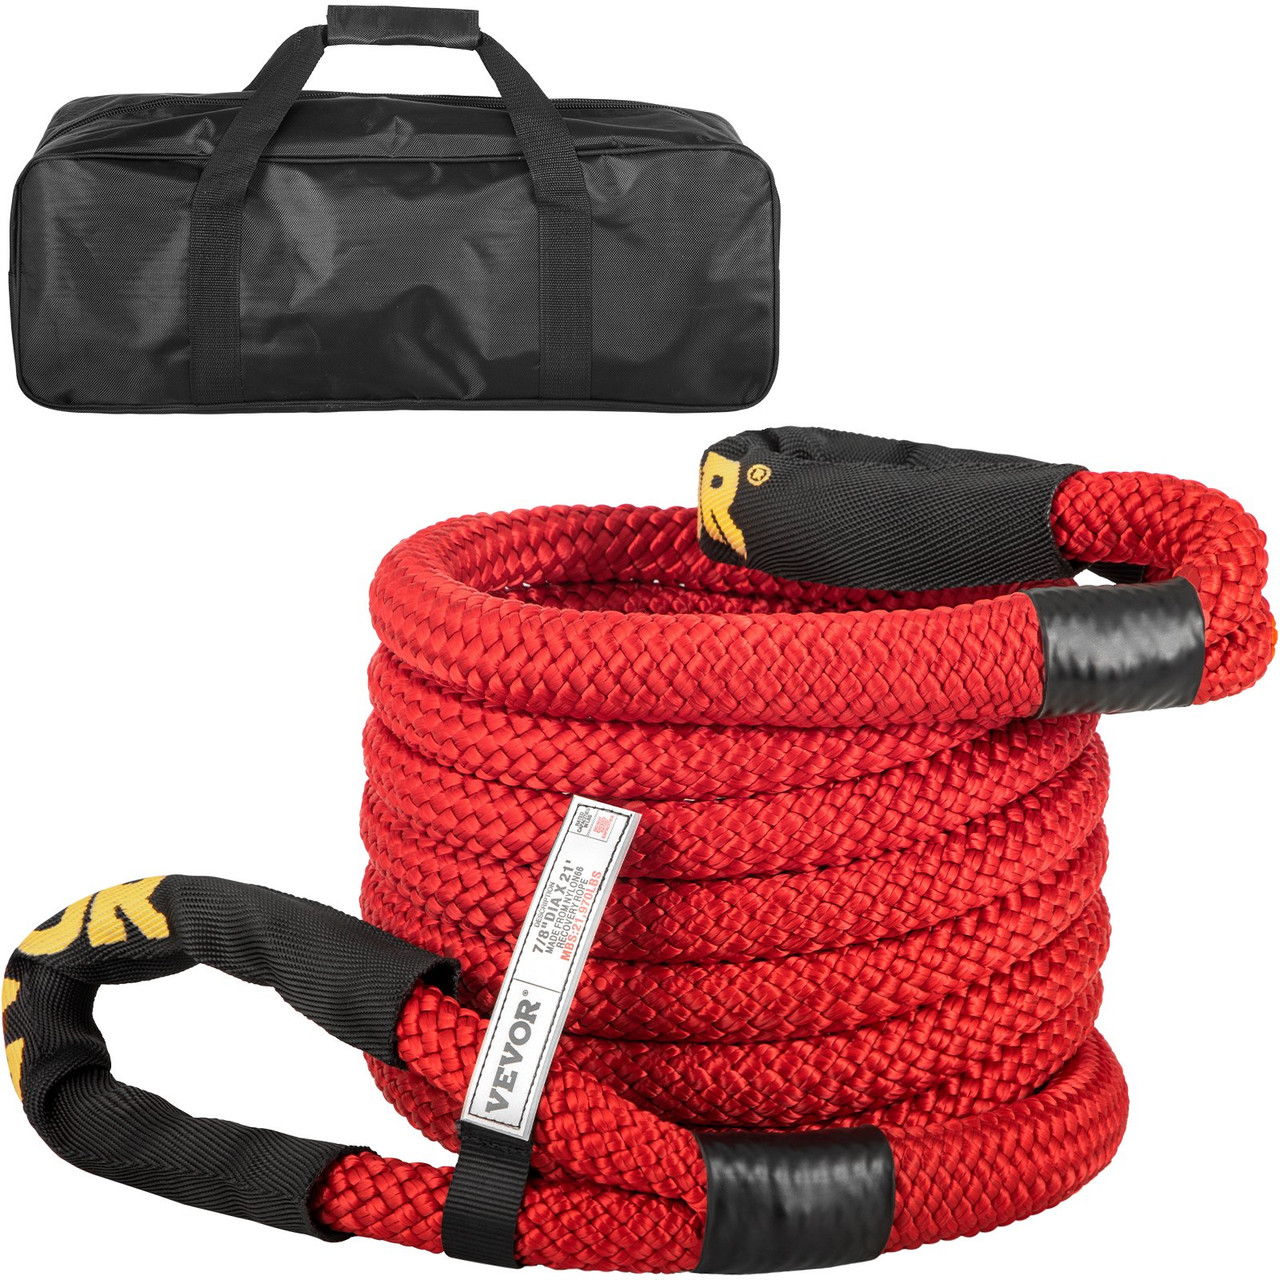 Kinetic Energy Recovery Rope Tow Rope 7/8" x 21' 21970 LBS w/ Carry Bag